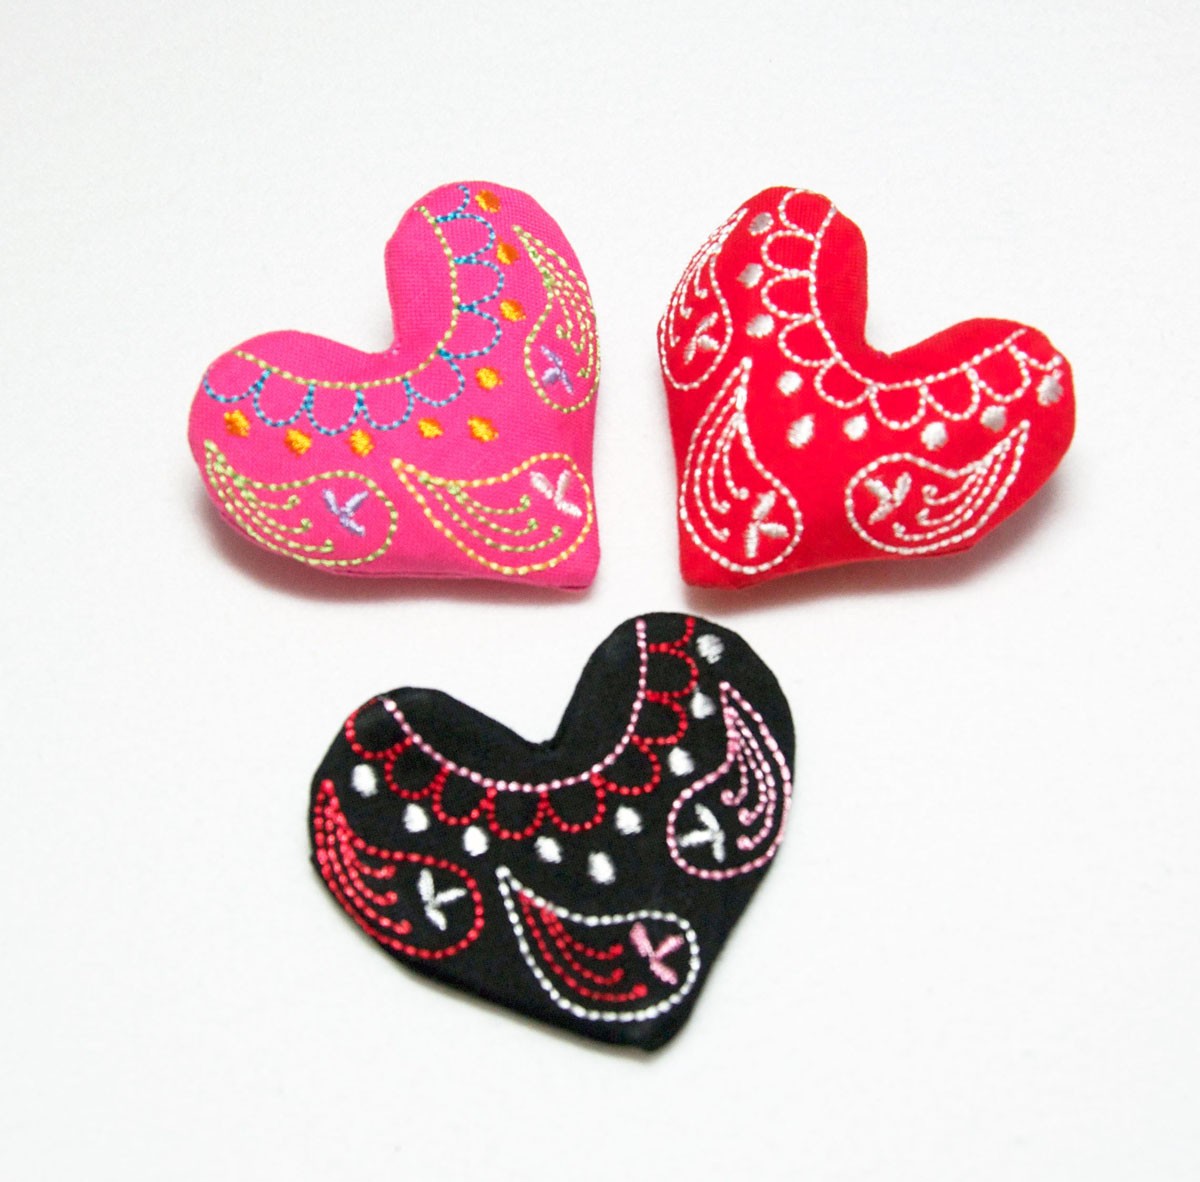 Embroidery Machine Patterns Designs Embroidered Heart Pin And Free Embroidery Design Weallsew